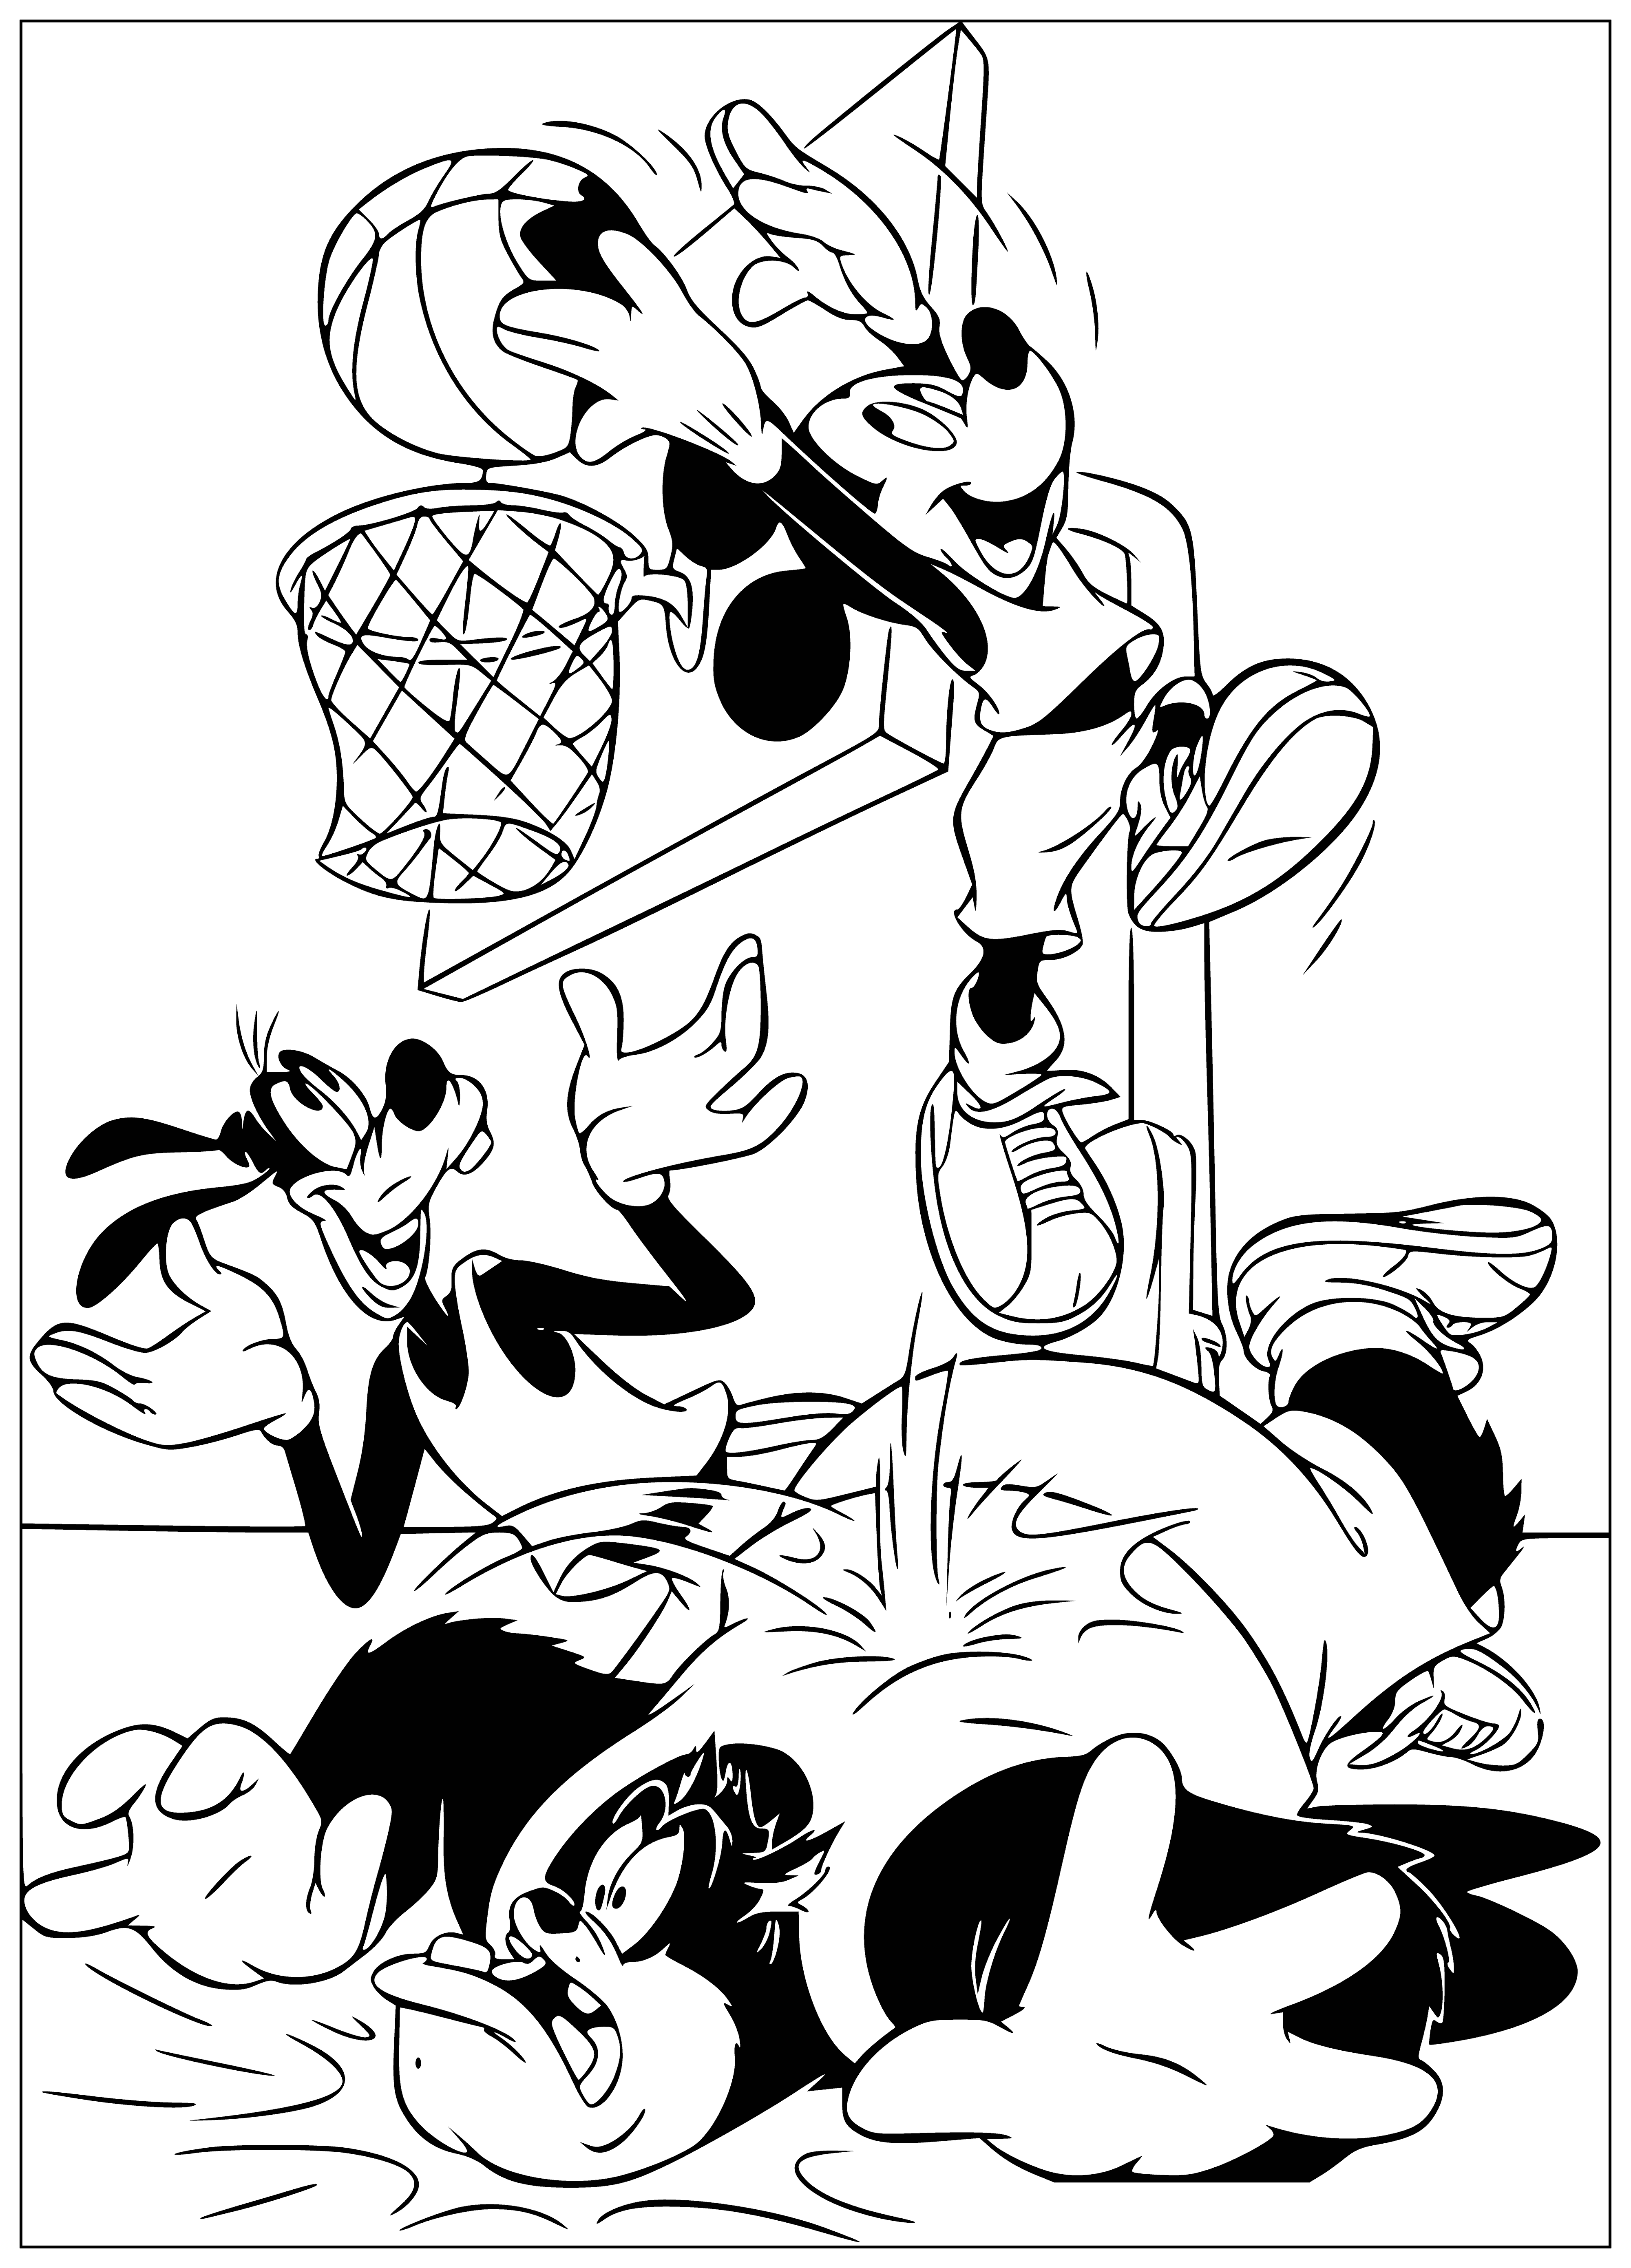 coloring page: Crowd of people looking up at a stage with Mickey Mouse, Donald Duck, Goofy, and Pluto. Colorful banners & streamers.